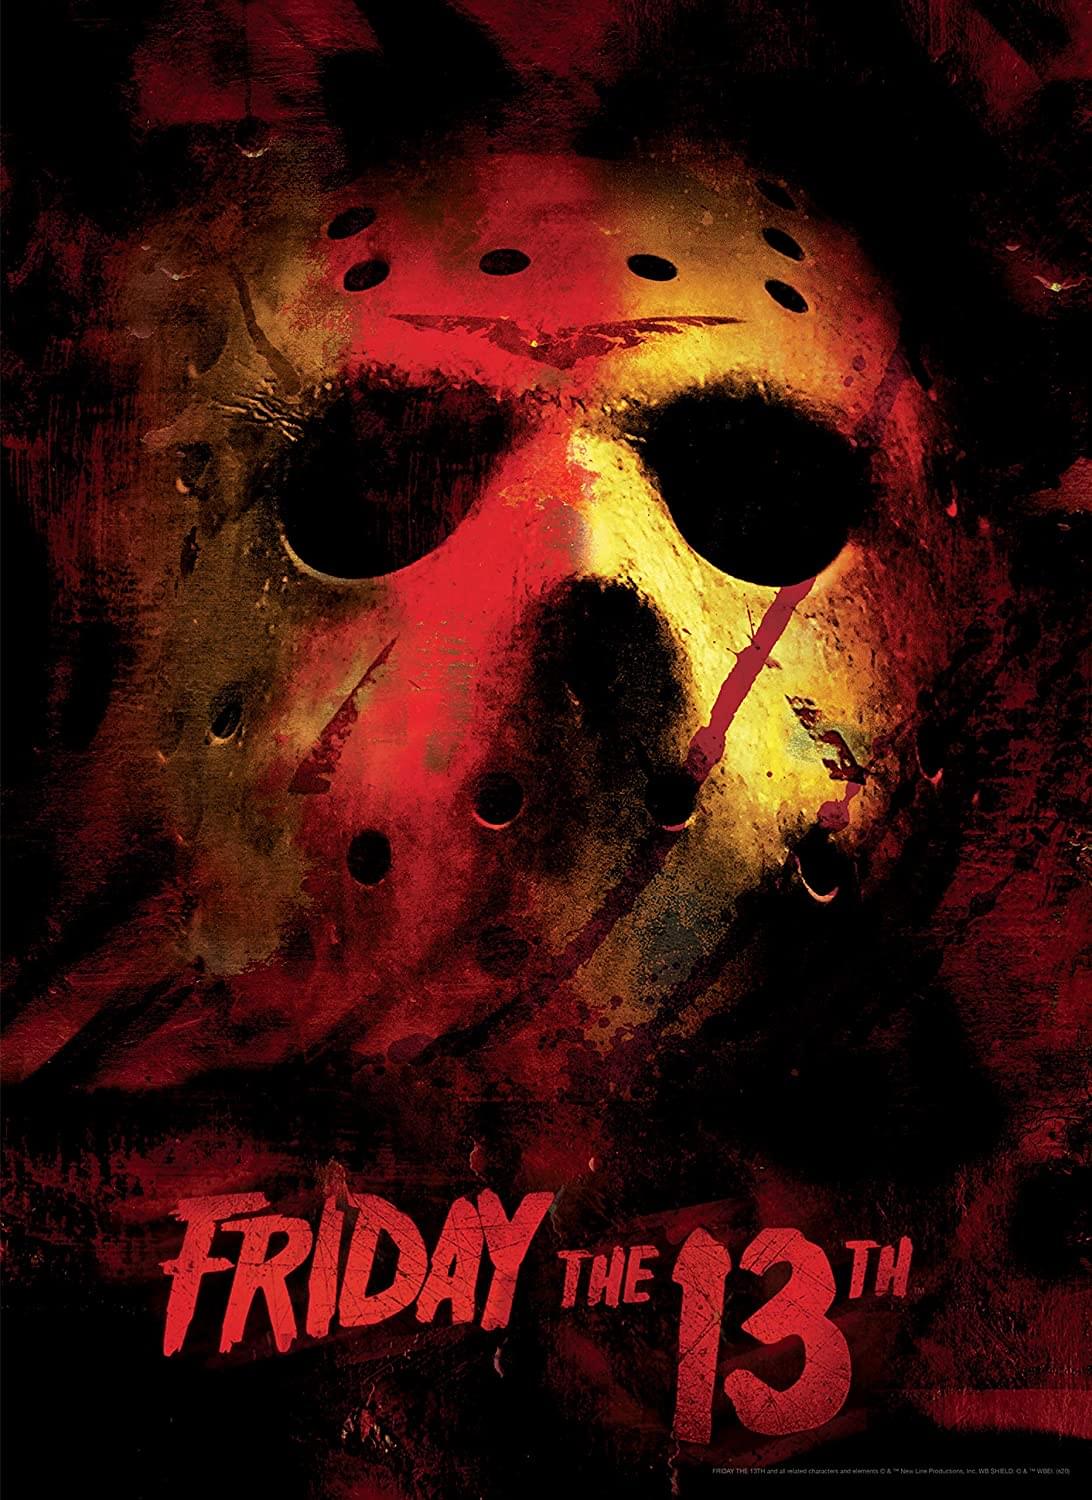 Friday the 13th 1000 Piece Jigsaw Puzzle